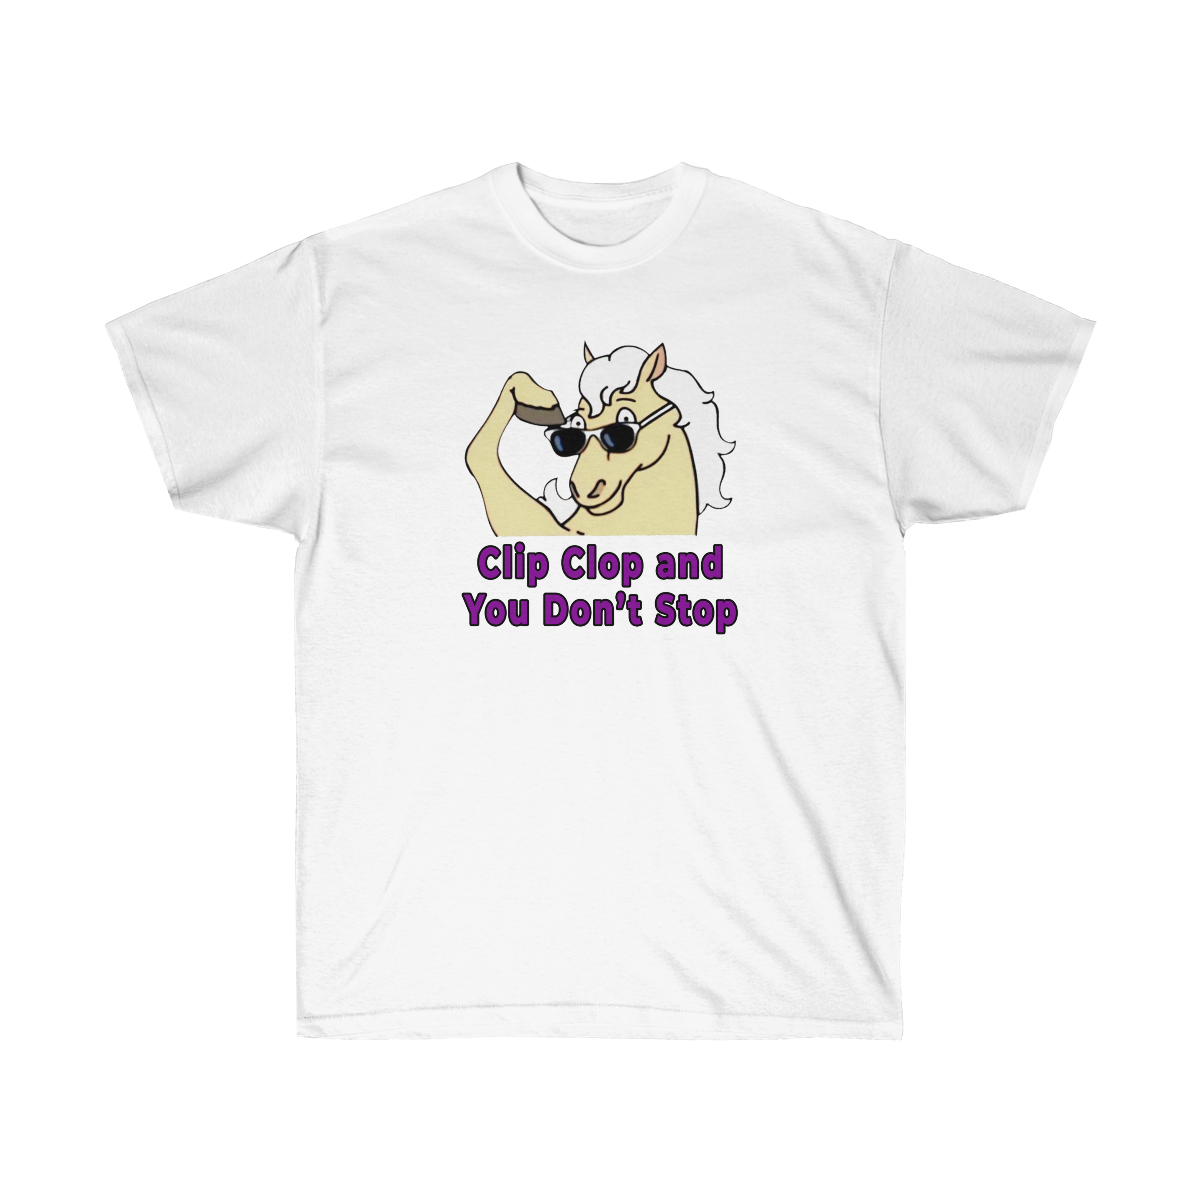 Clip Clop and You Don't Stop Unisex Cotton Tee - Just Like Bob Bob's Burgers